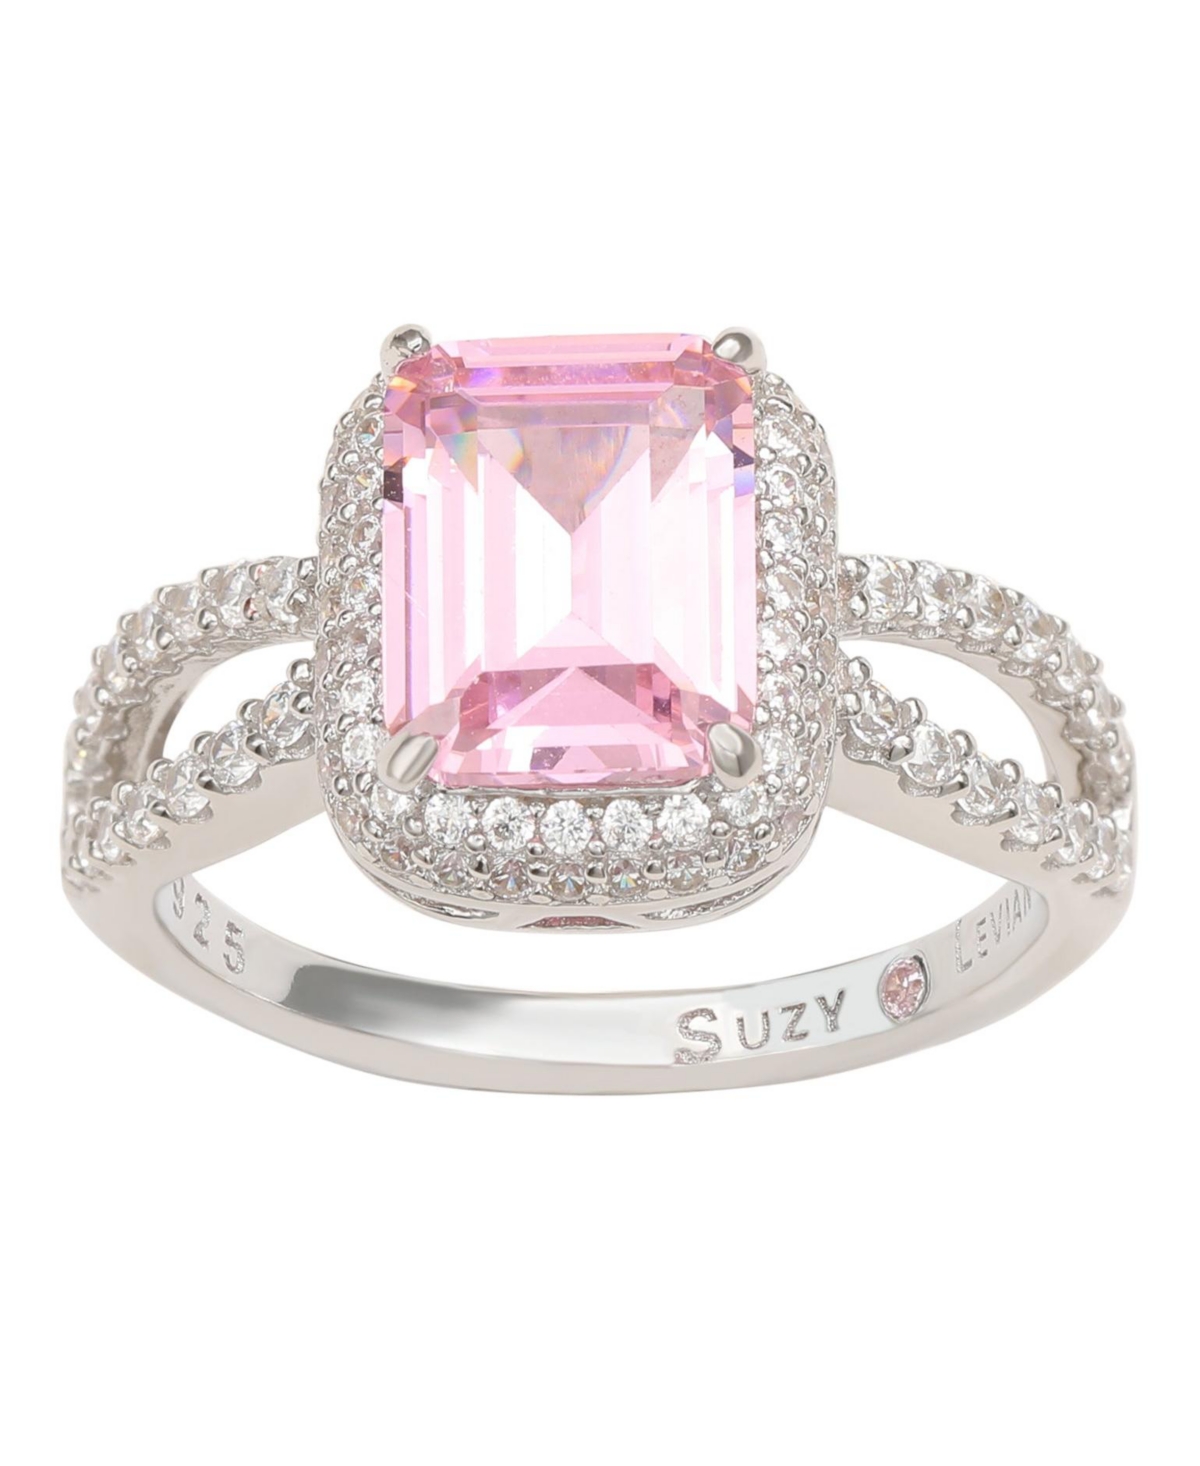 Suzy Levian Sterling Silver Cubic Zirconia Pink Engagement Ring - Pink